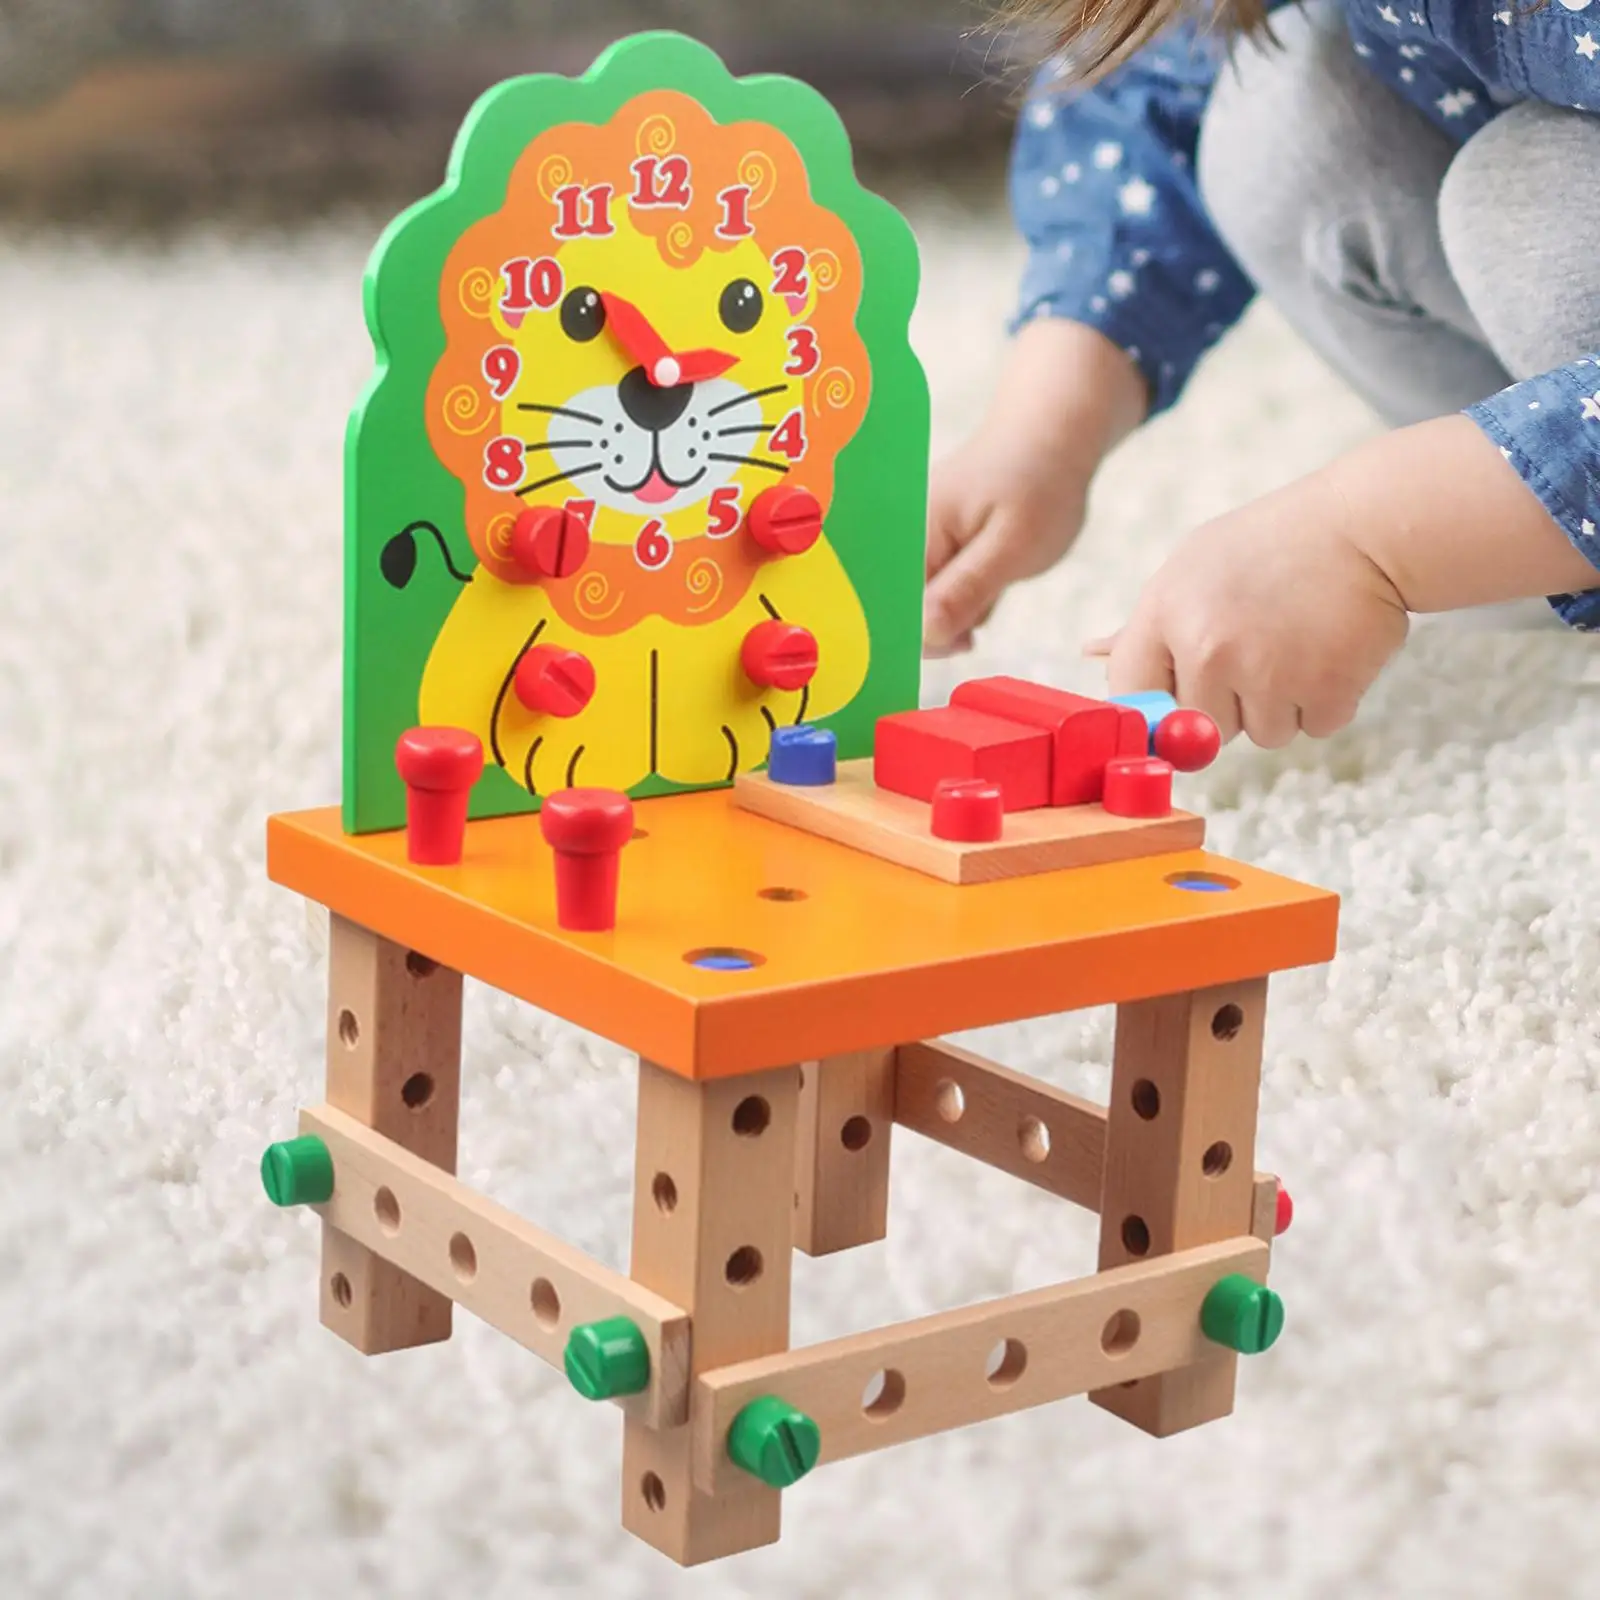 Wooden Chair Models Construction Play Set Montessori Toys with Tools Wooden Assembling Chair for Children Toddler Gifts